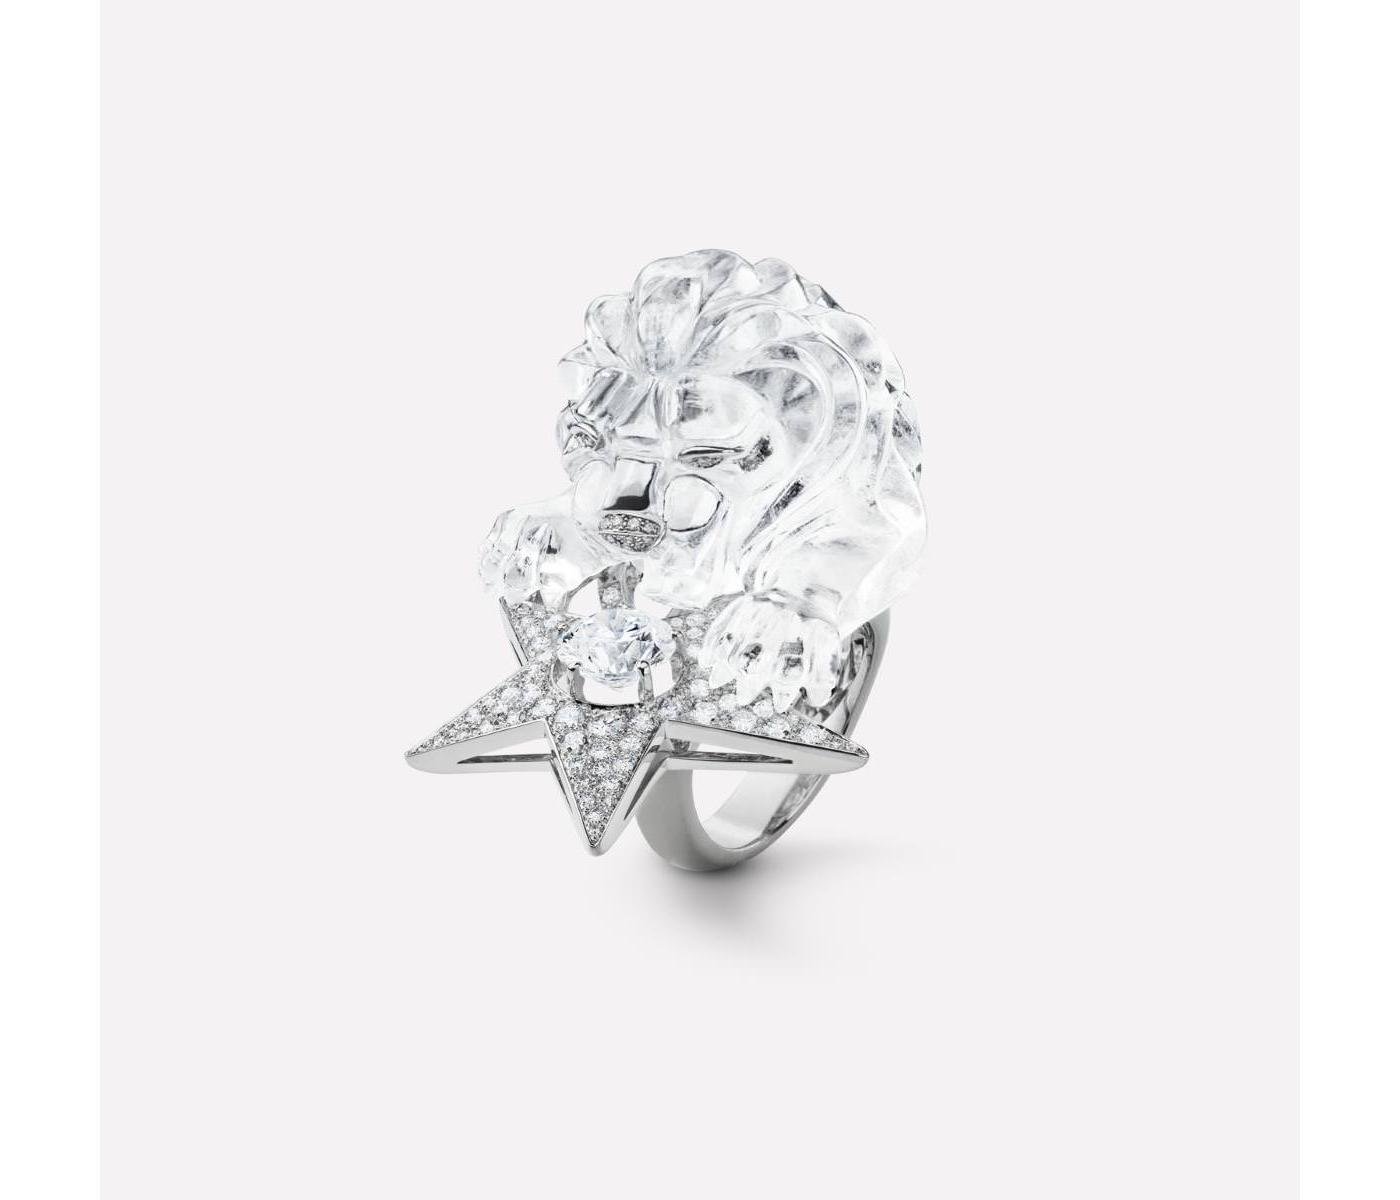 Ring by Chanel